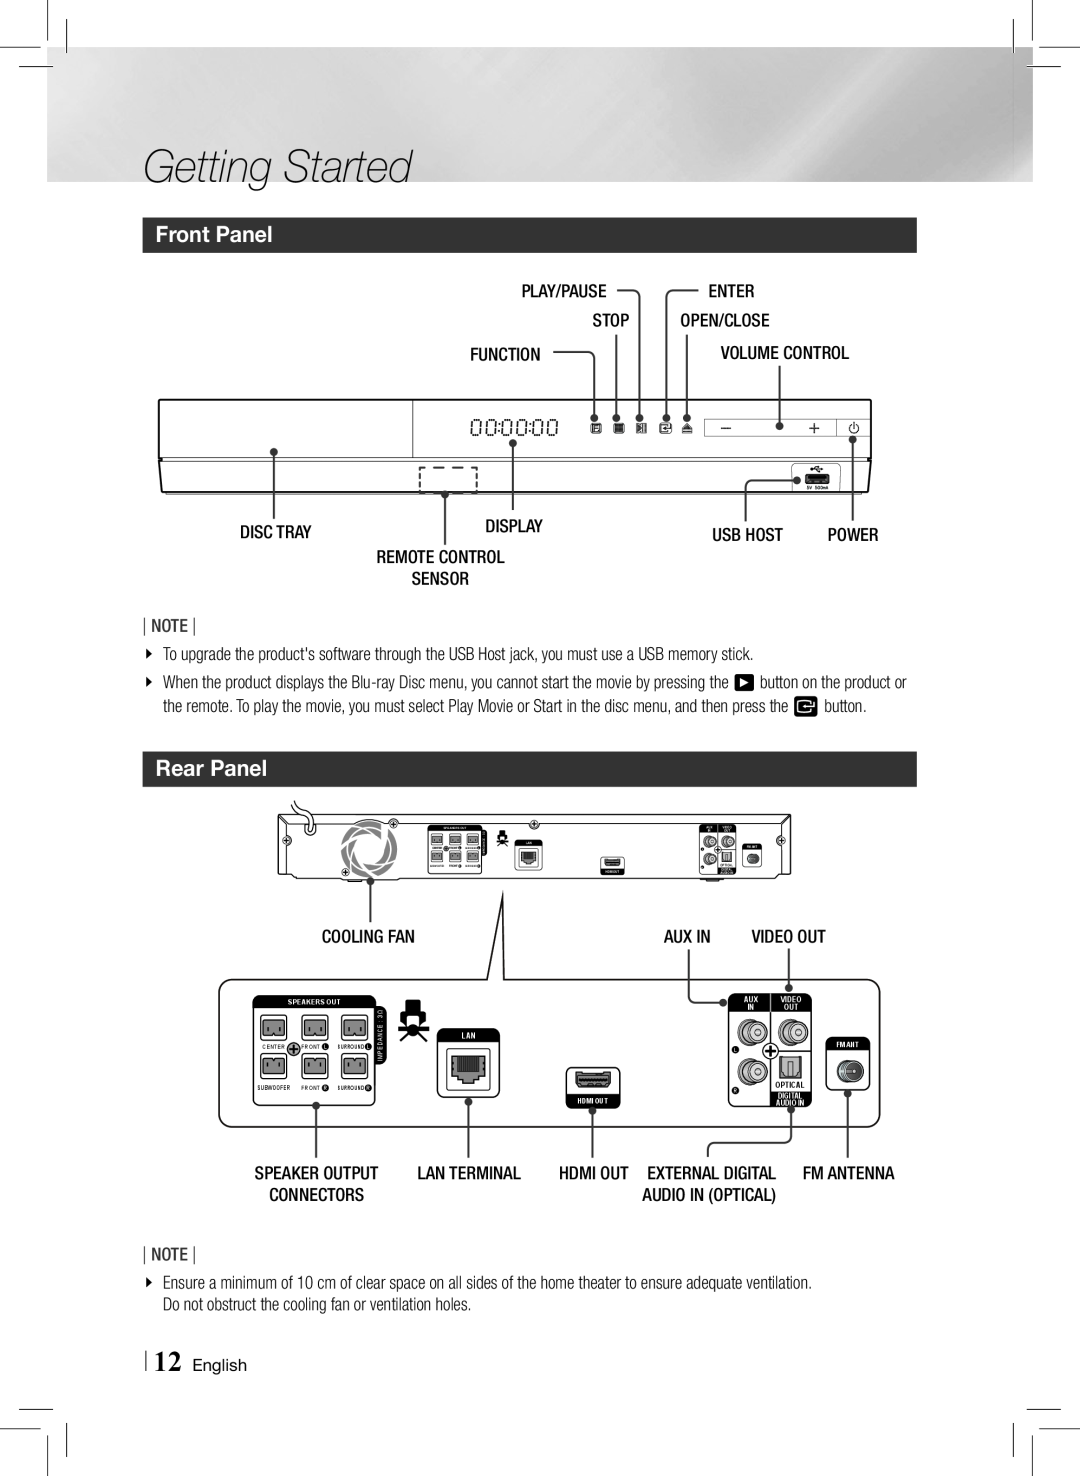 Samsung HTE3500ZA user manual Front Panel, Rear Panel, Getting Started 